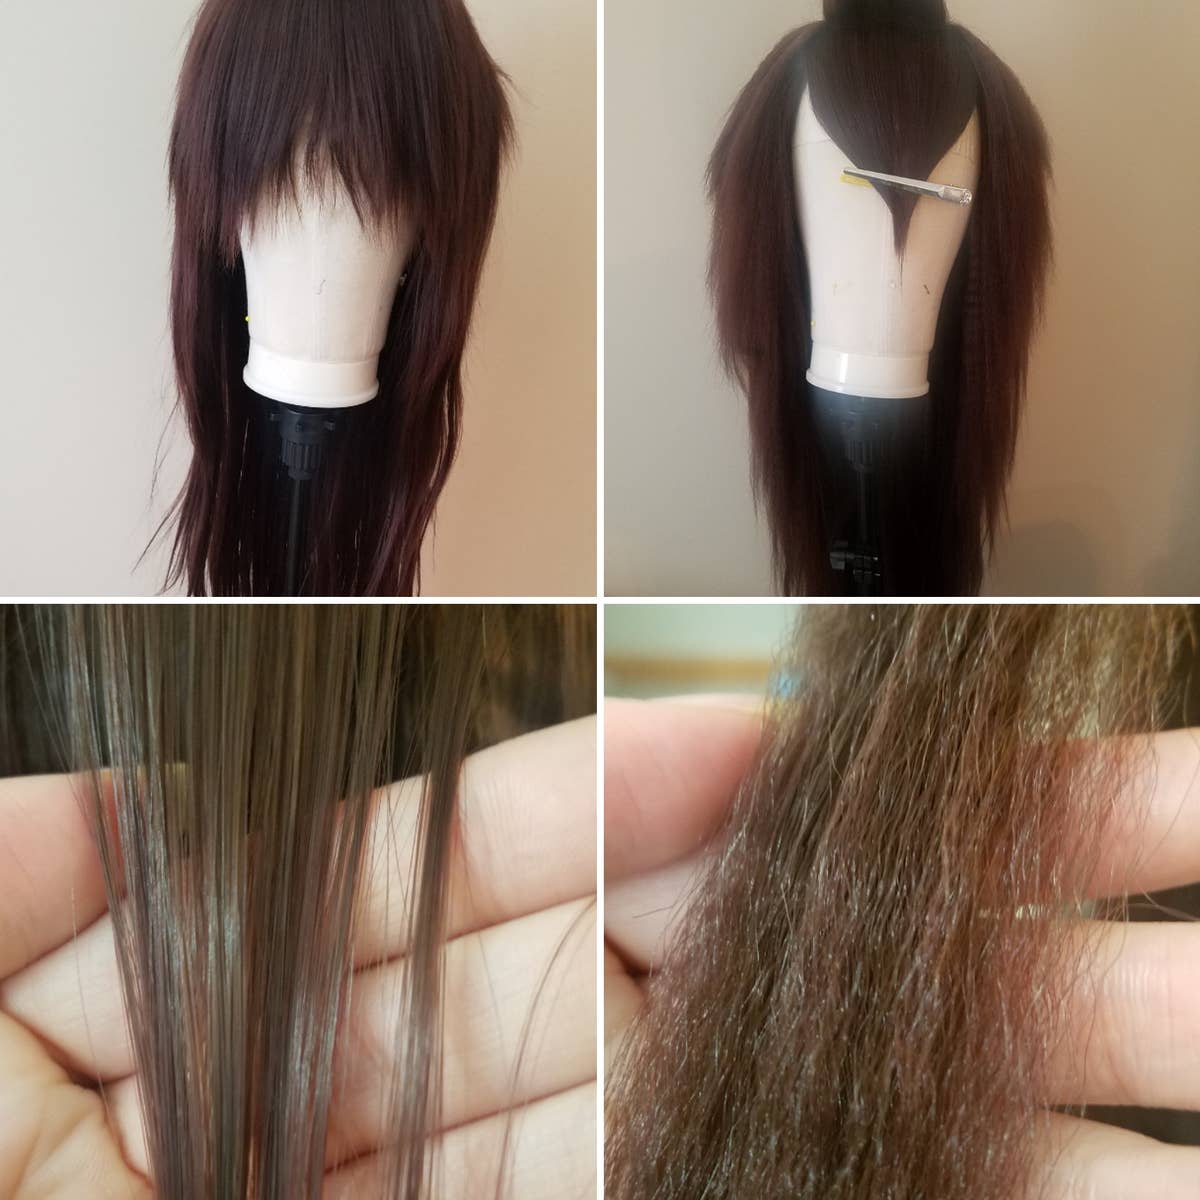 Cosplay Wig Styling Basics! [ How to Brush, Trim & Style a Wig